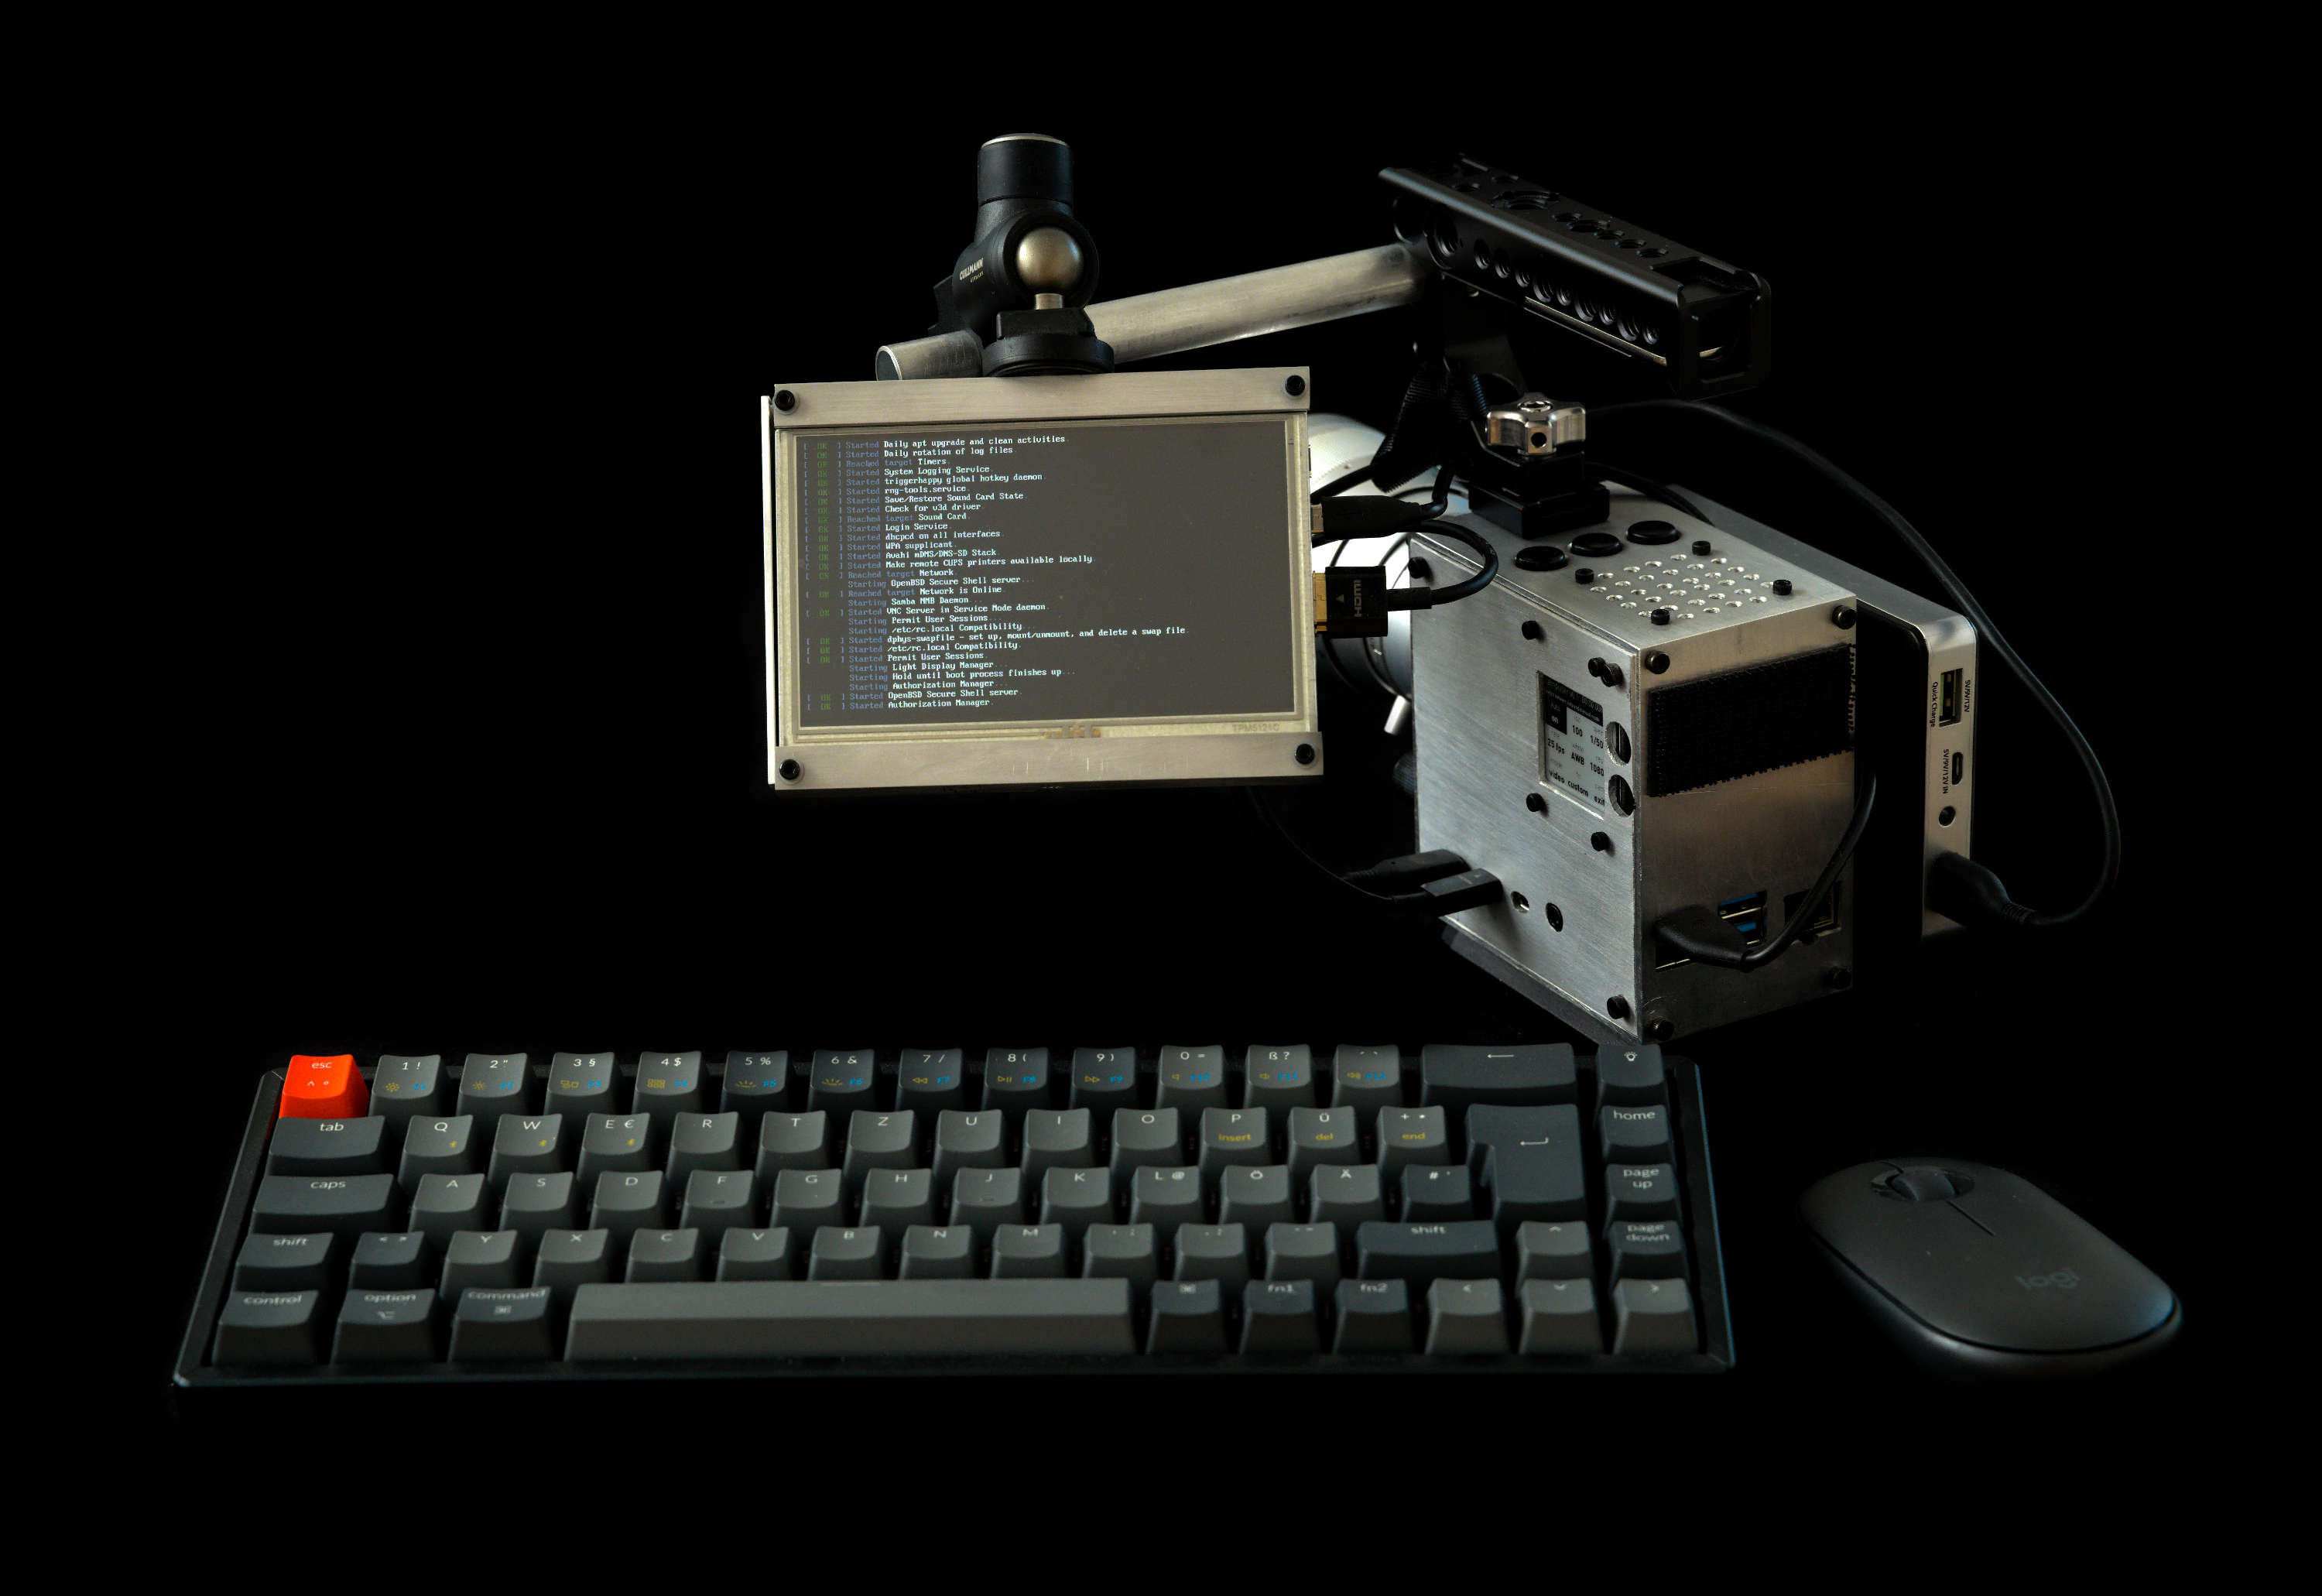 camera setup as a computer showing linux bootscreen with mouse and keyboard